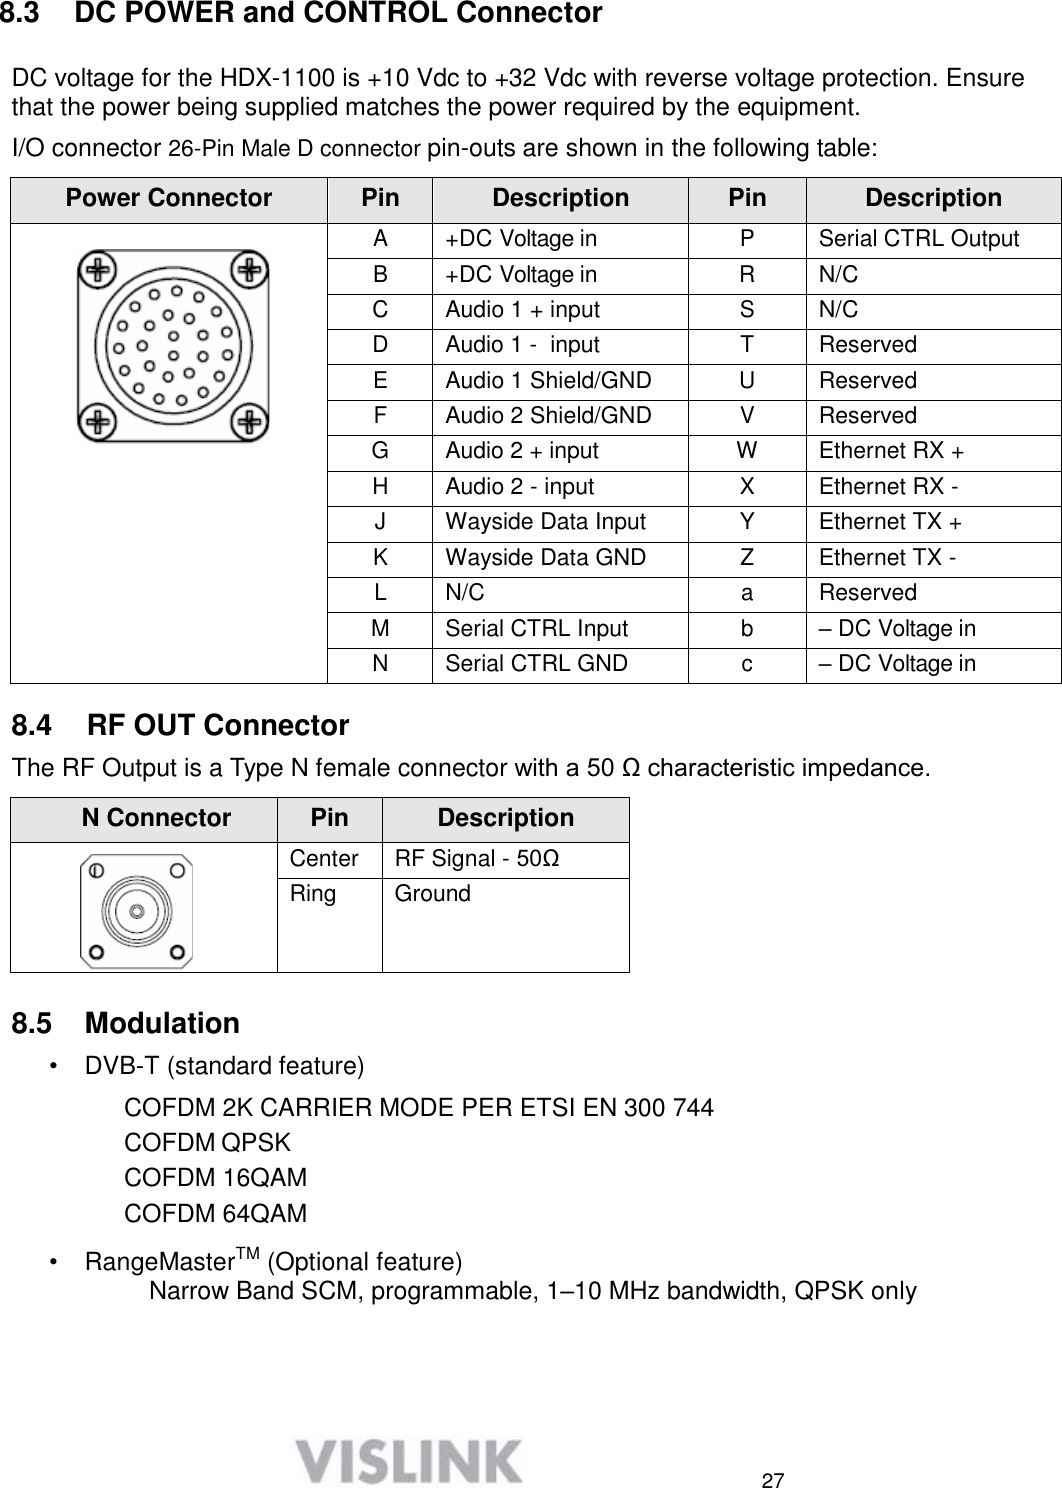  27     8.3  DC POWER and CONTROL Connector  DC voltage for the HDX-1100 is +10 Vdc to +32 Vdc with reverse voltage protection. Ensure that the power being supplied matches the power required by the equipment.  I/O connector 26-Pin Male D connector pin-outs are shown in the following table:  Power Connector Pin Description Pin Description  A +DC Voltage in P Serial CTRL Output B +DC Voltage in R N/C C Audio 1 + input S N/C D Audio 1 -  input T Reserved E Audio 1 Shield/GND U Reserved F Audio 2 Shield/GND V Reserved G Audio 2 + input W Ethernet RX +  H Audio 2 - input X Ethernet RX - J Wayside Data Input Y Ethernet TX + K Wayside Data GND Z Ethernet TX - L N/C a Reserved M Serial CTRL Input b – DC Voltage in N Serial CTRL GND c – DC Voltage in  8.4  RF OUT Connector  The RF Output is a Type N female connector with a 50 Ω characteristic impedance.  N Connector Pin Description  Center RF Signal - 50Ω Ring Ground  8.5  Modulation  •  DVB-T (standard feature)  COFDM 2K CARRIER MODE PER ETSI EN 300 744  COFDM QPSK COFDM 16QAM COFDM 64QAM  •  RangeMasterTM (Optional feature)       Narrow Band SCM, programmable, 1–10 MHz bandwidth, QPSK only      